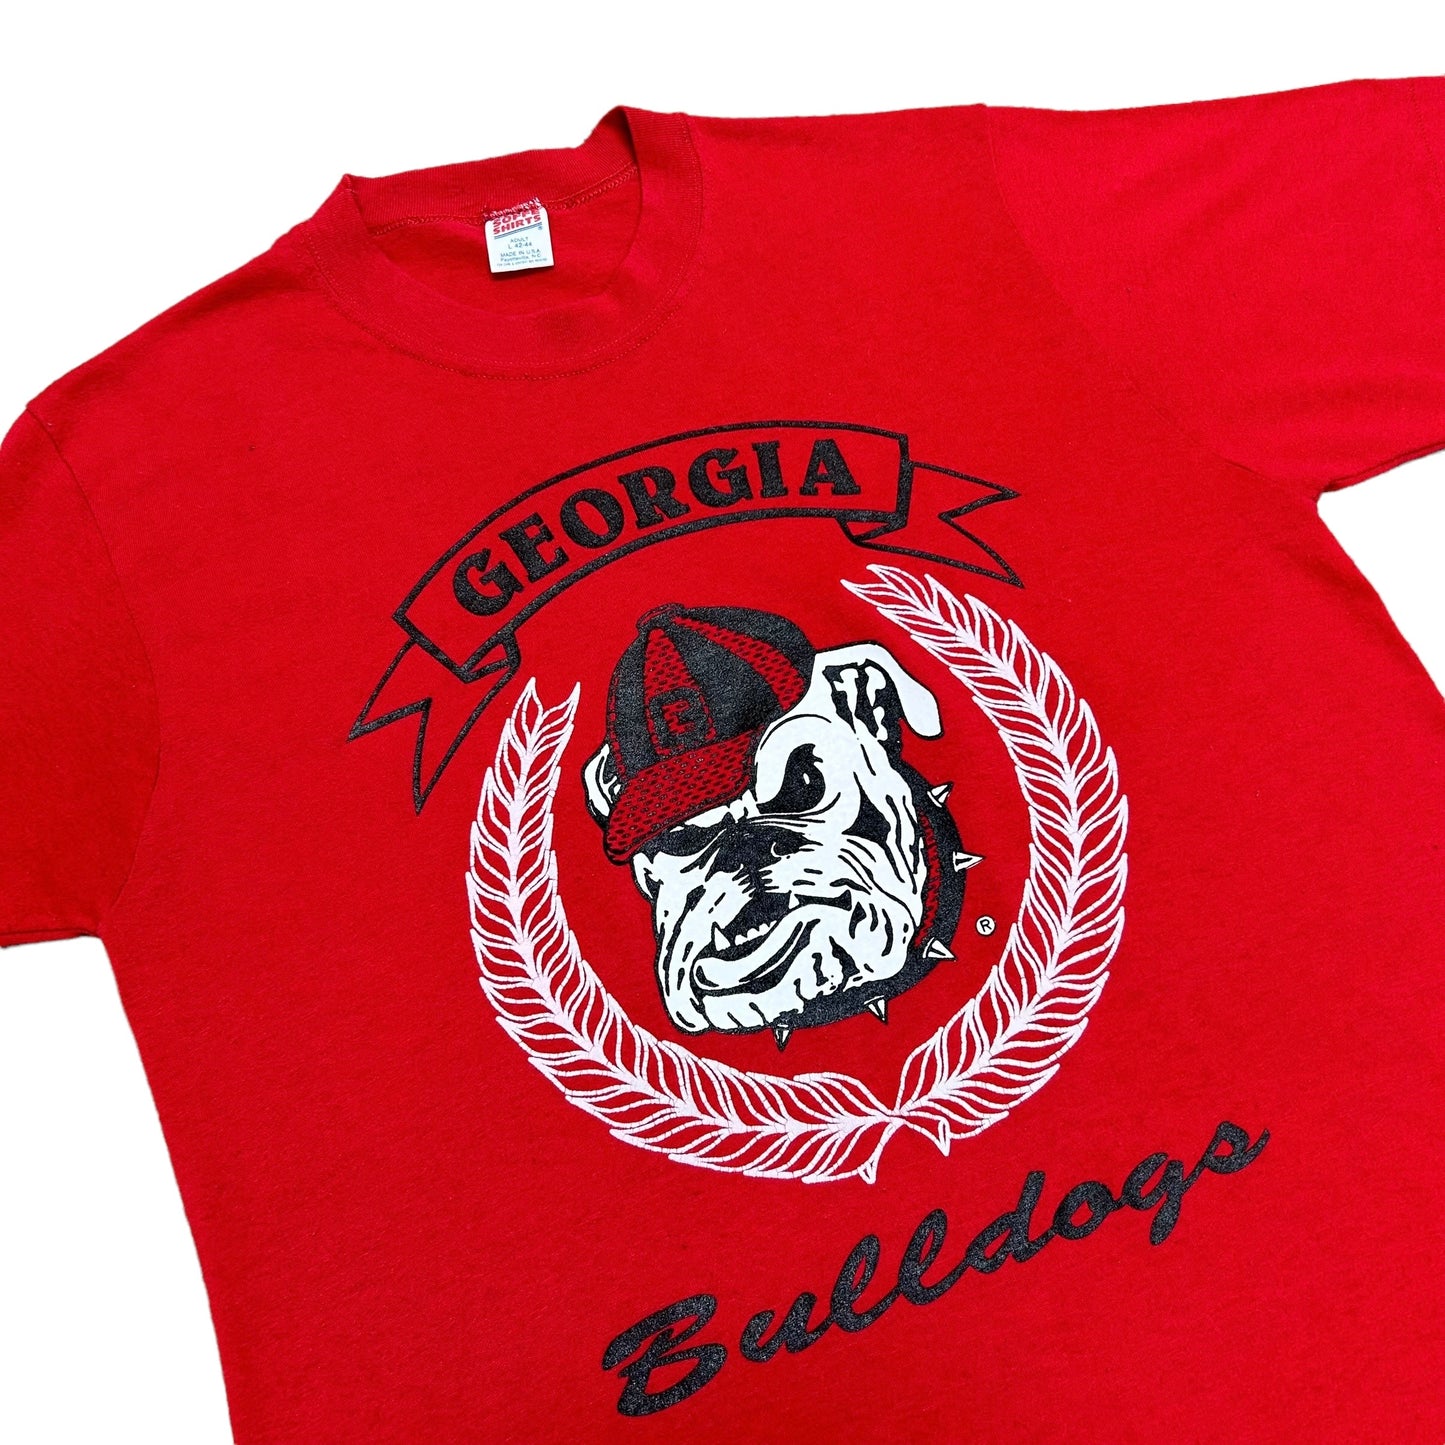 Vintage 1980s Georgia Bulldogs Red Graphic T-Shirt - Size Large